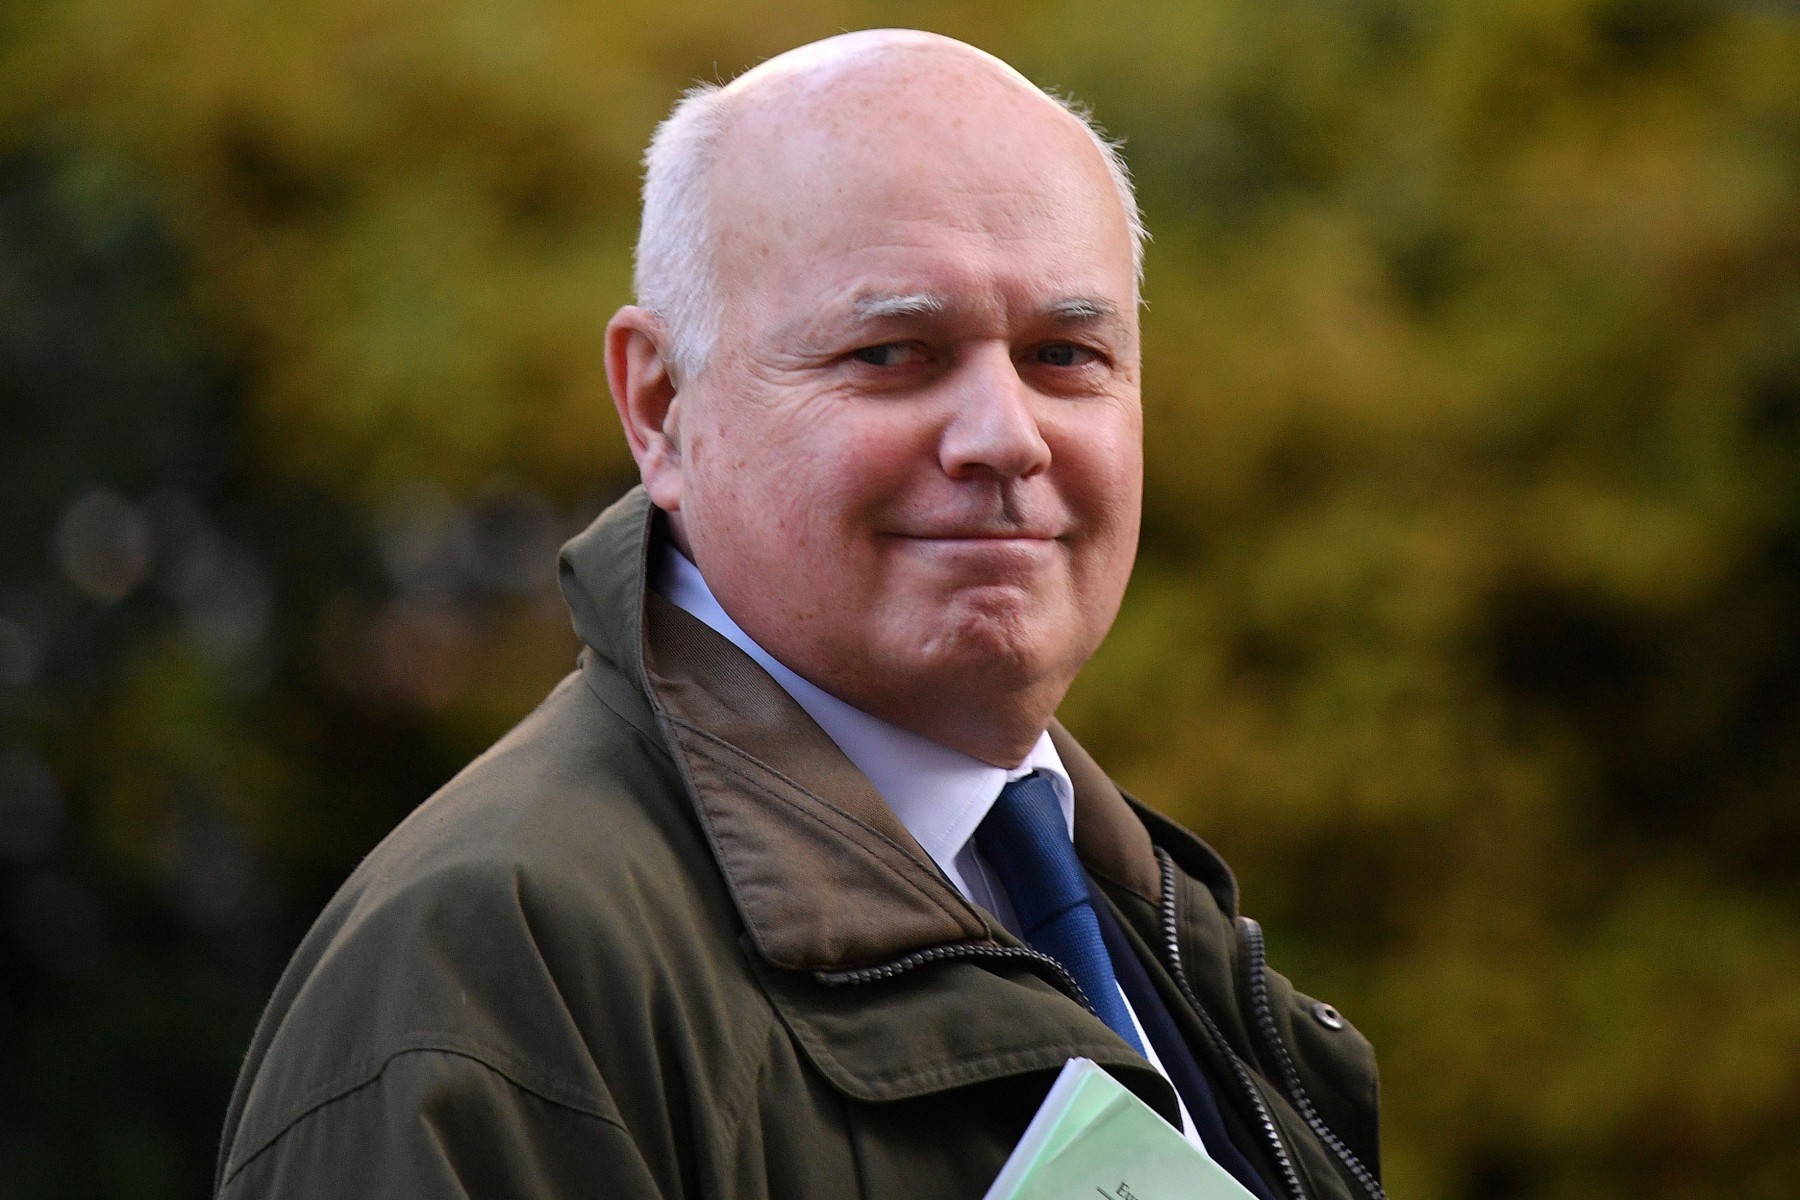 Iain Duncan Smith has said serious questions need to be asked about the BBCs audience selection